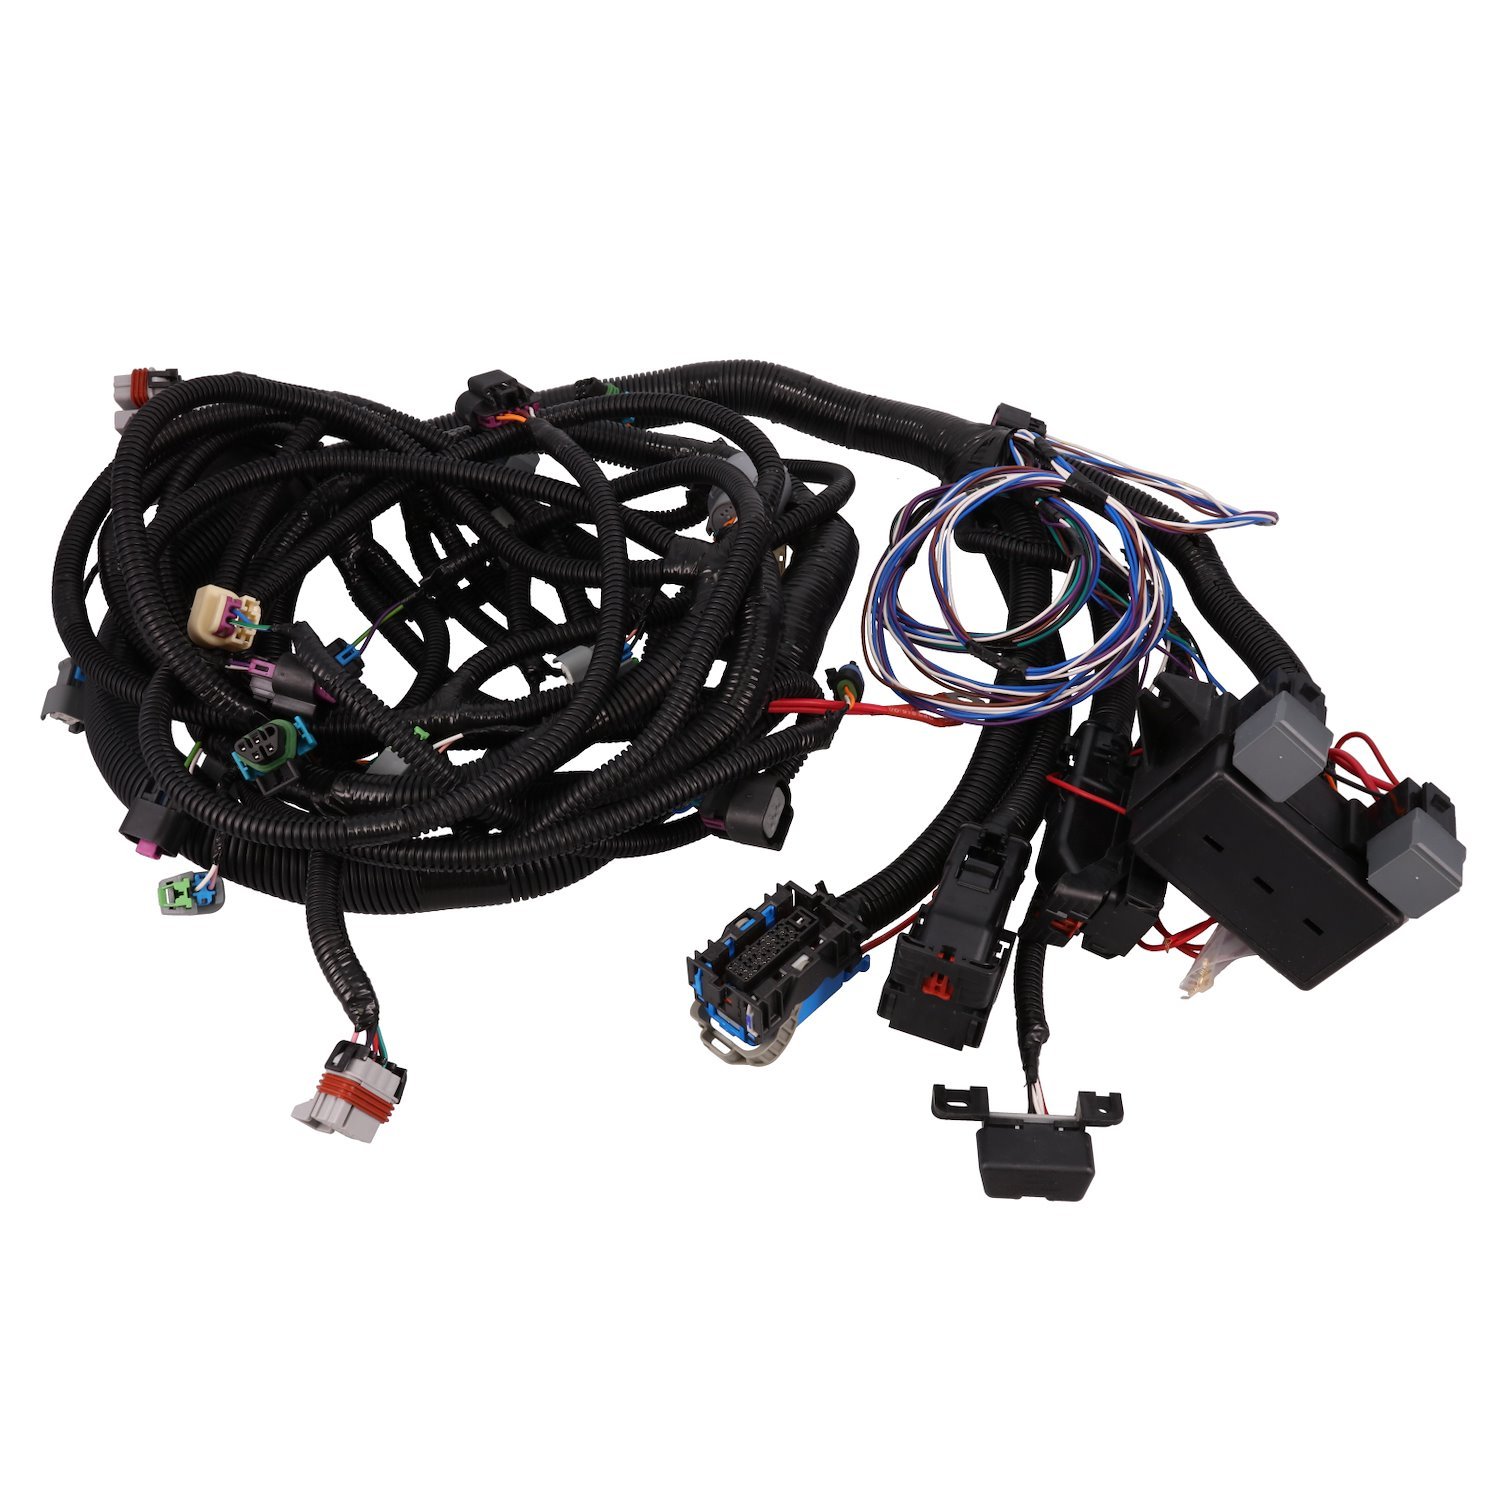 WH1214 Standalone Wiring Harness, LY6, L92 Drive by Wire w/ 4L60E 13-pin auto trans